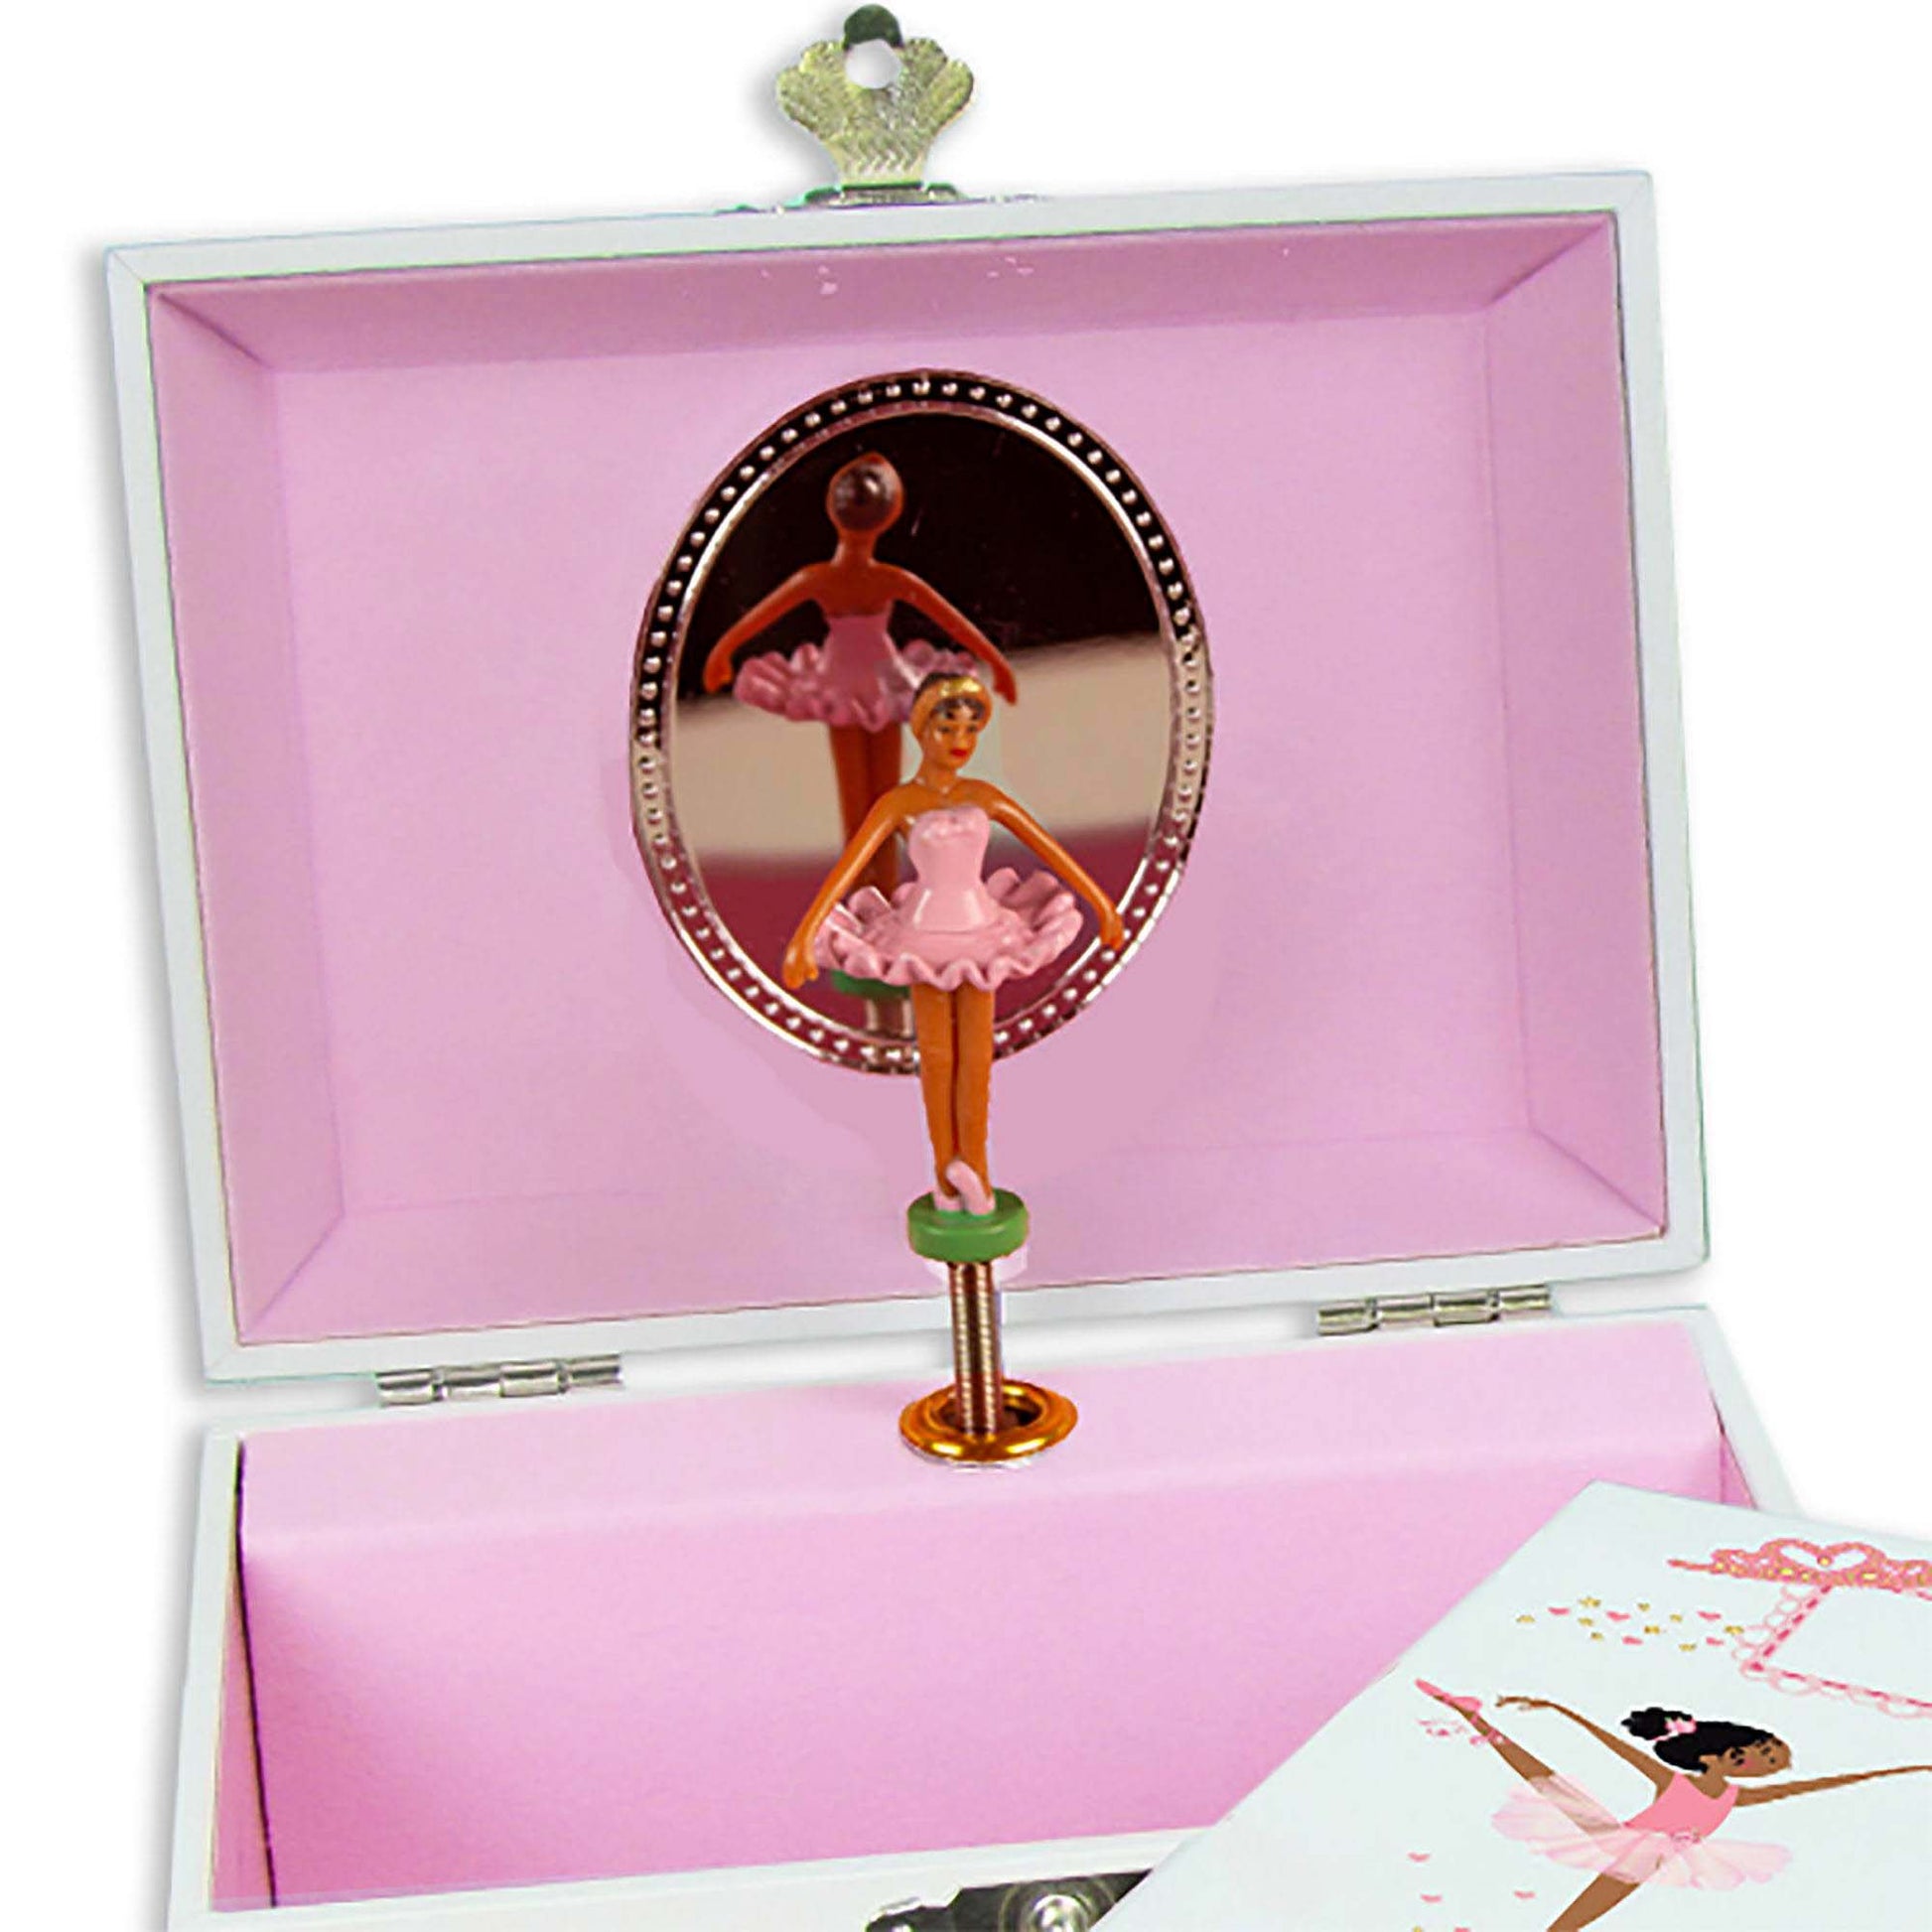 Personalized Ballerina Jewelry Box with Pink Bow design